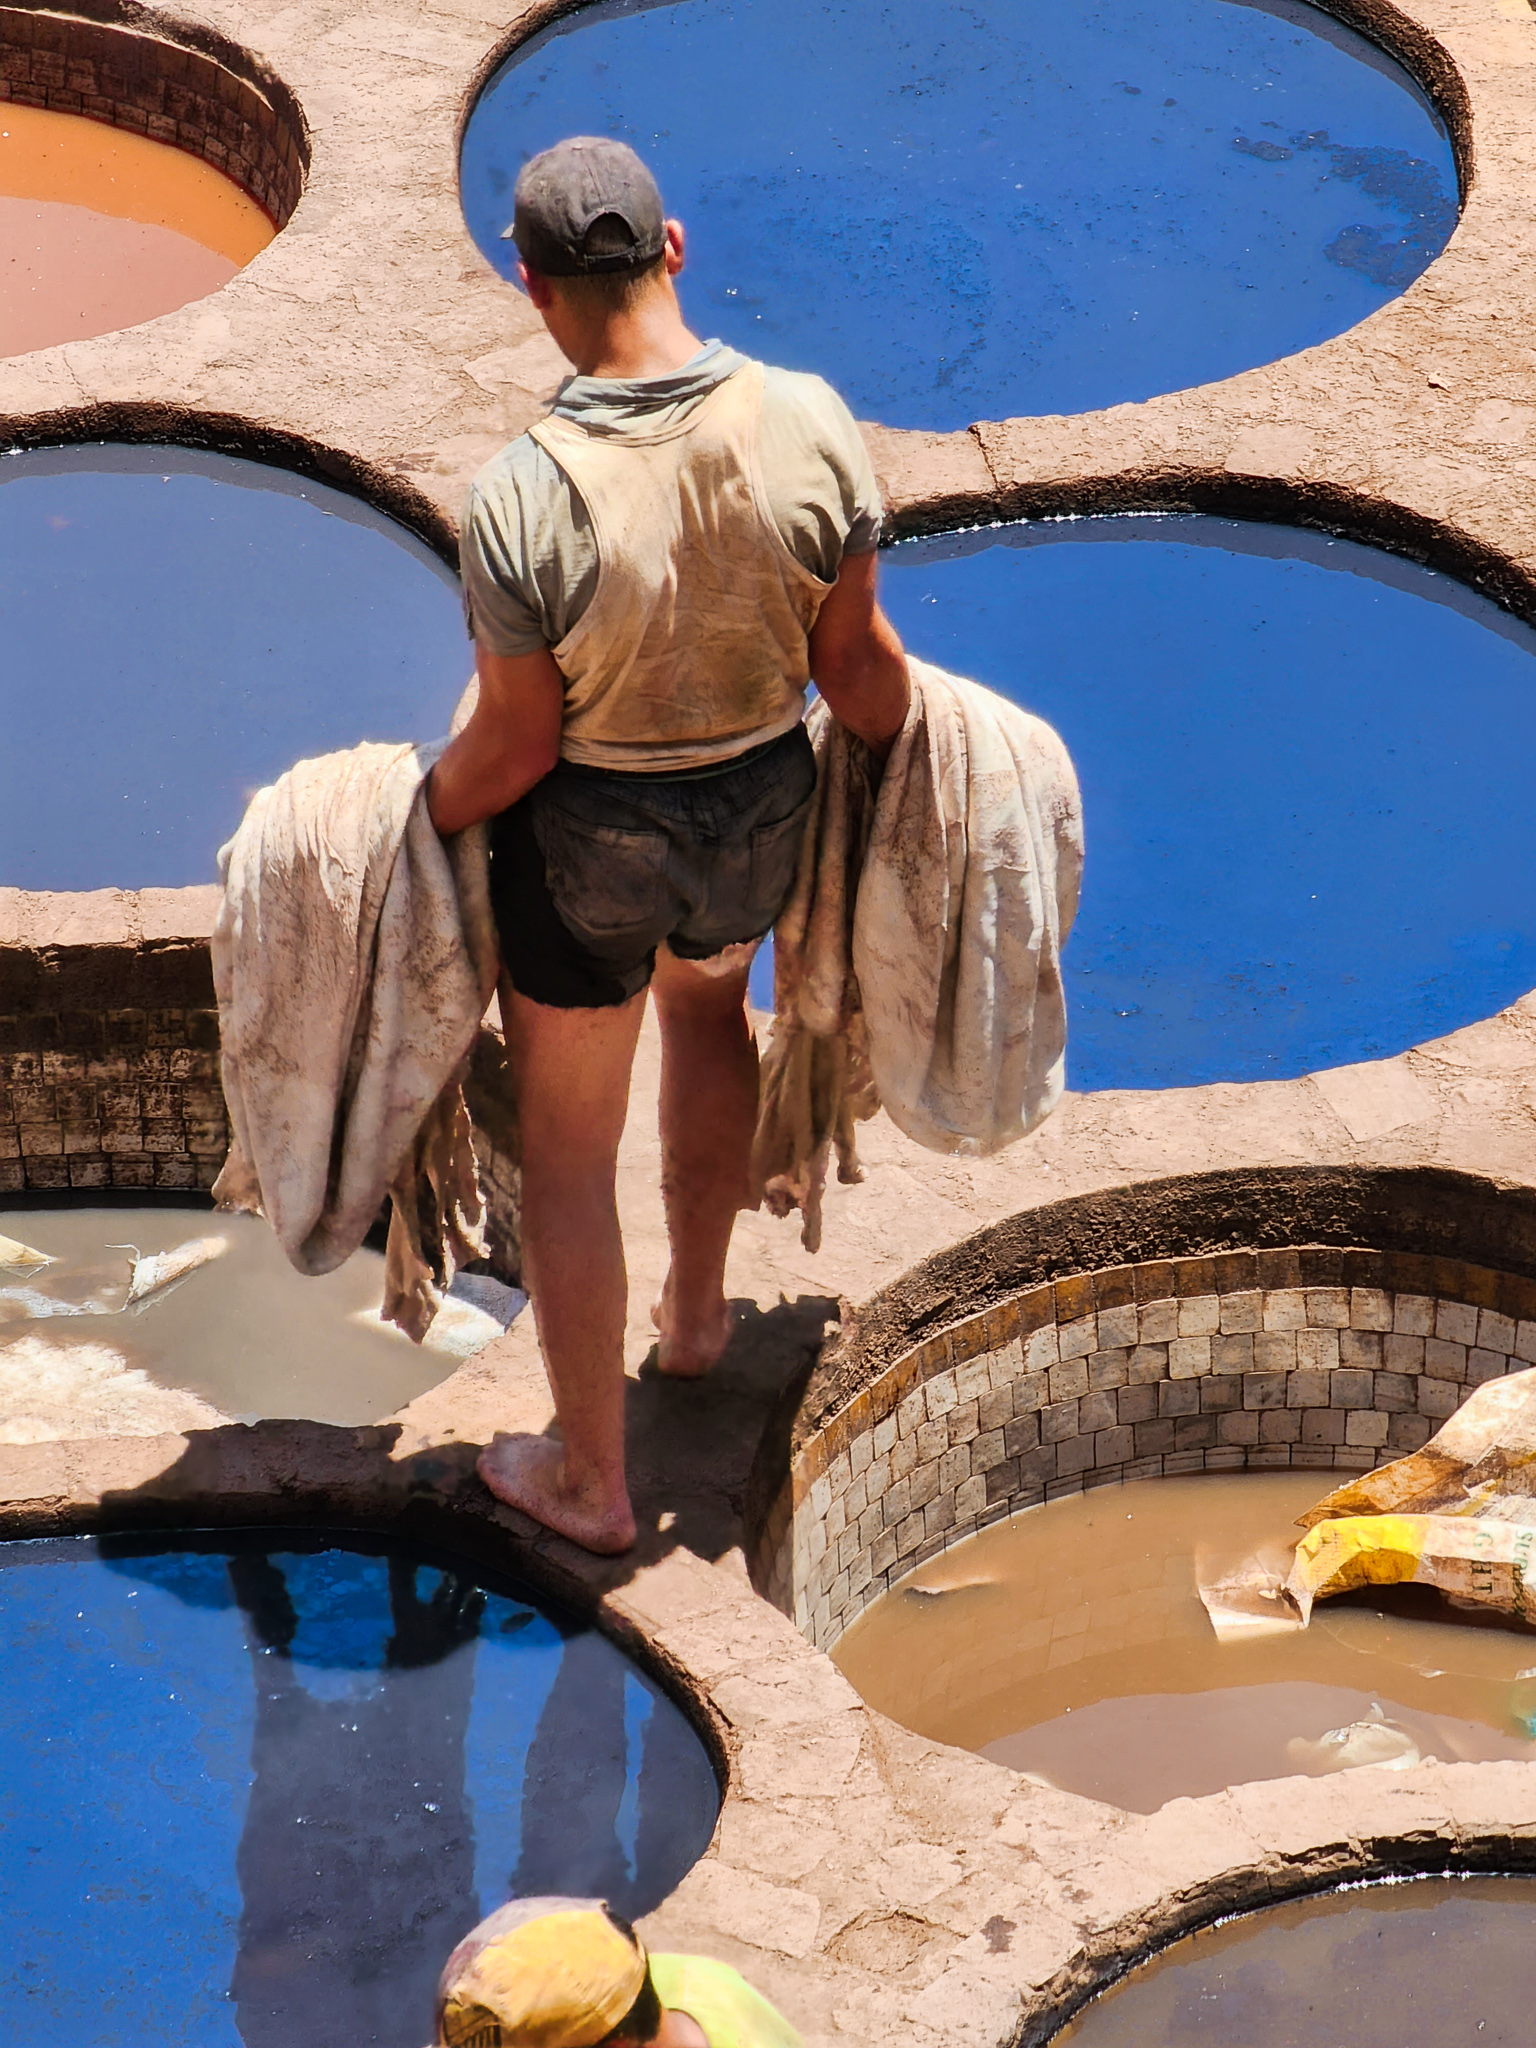 Fez Tannery Morocco